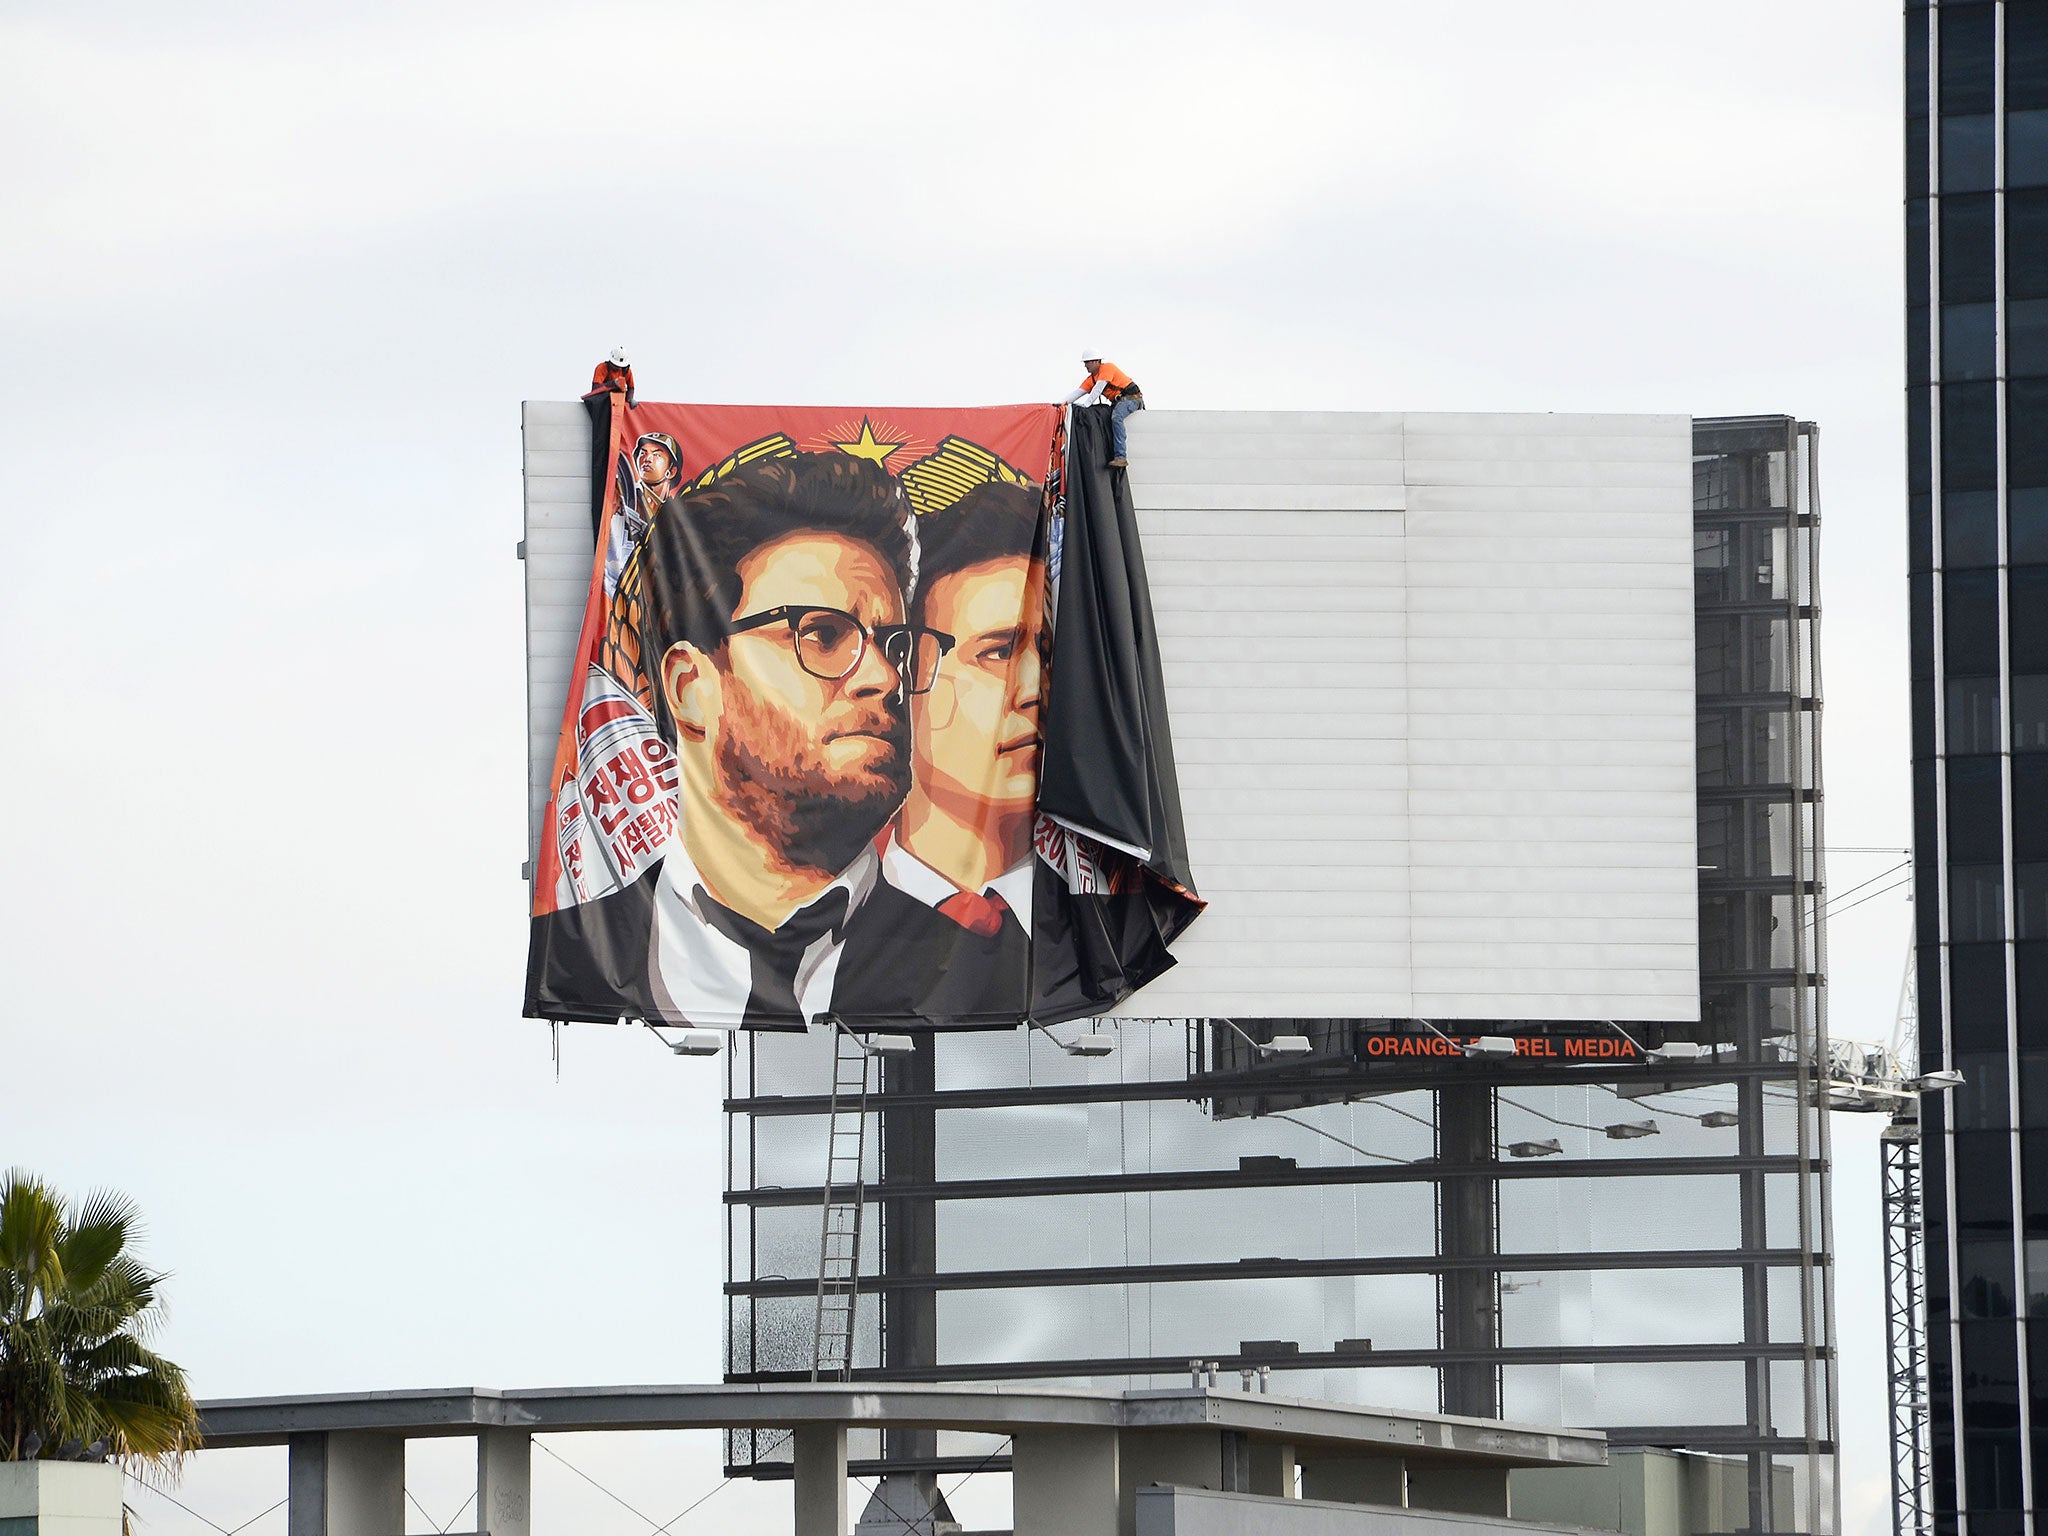 Workers remove a poster-banner for The Interview from a billboard in Hollywood